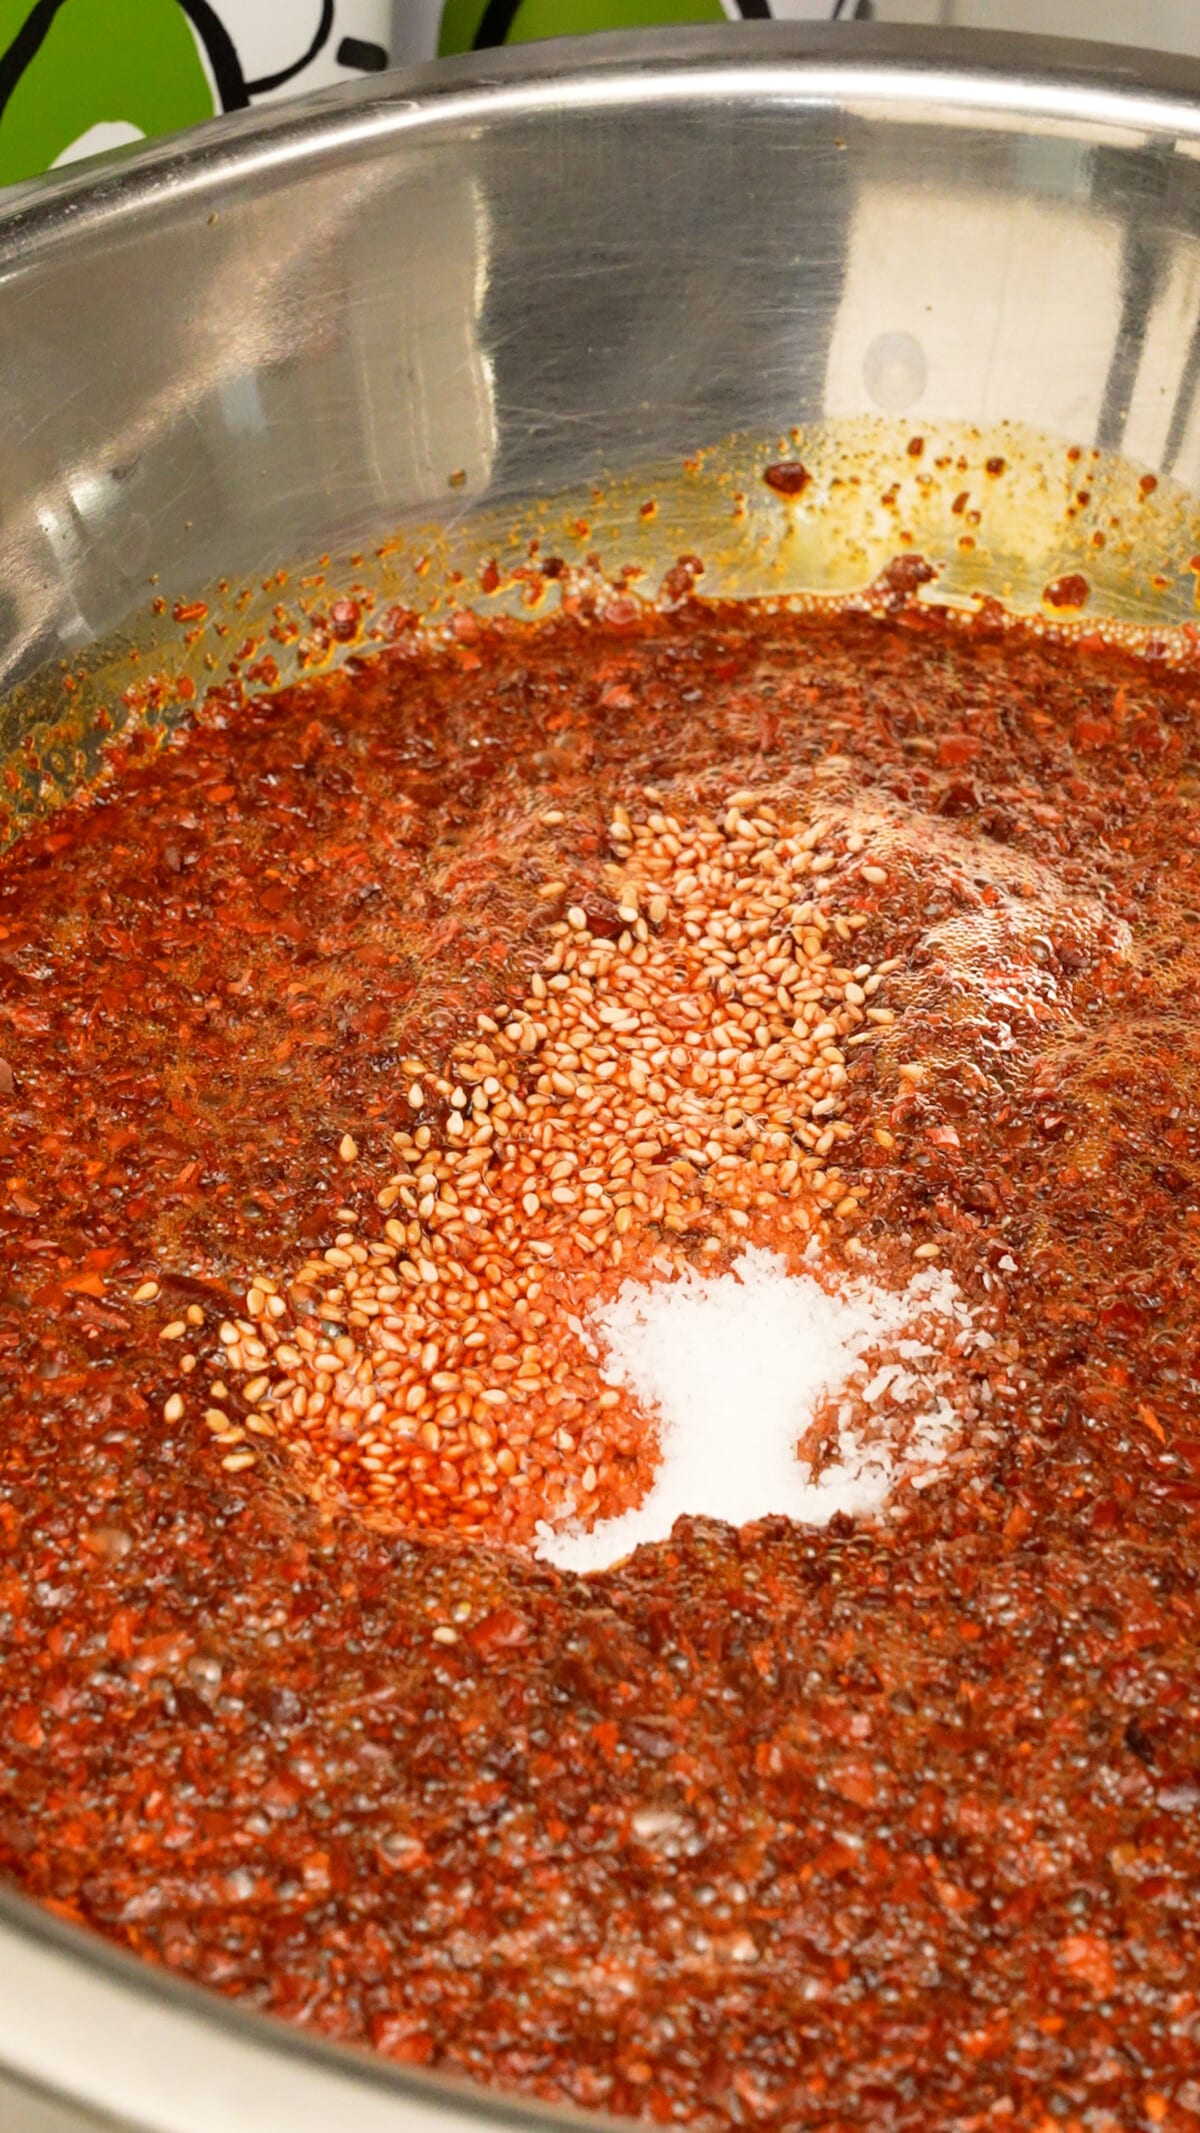 Sesame seeds, salt and sugar being added to chili oil in a metal bowl.